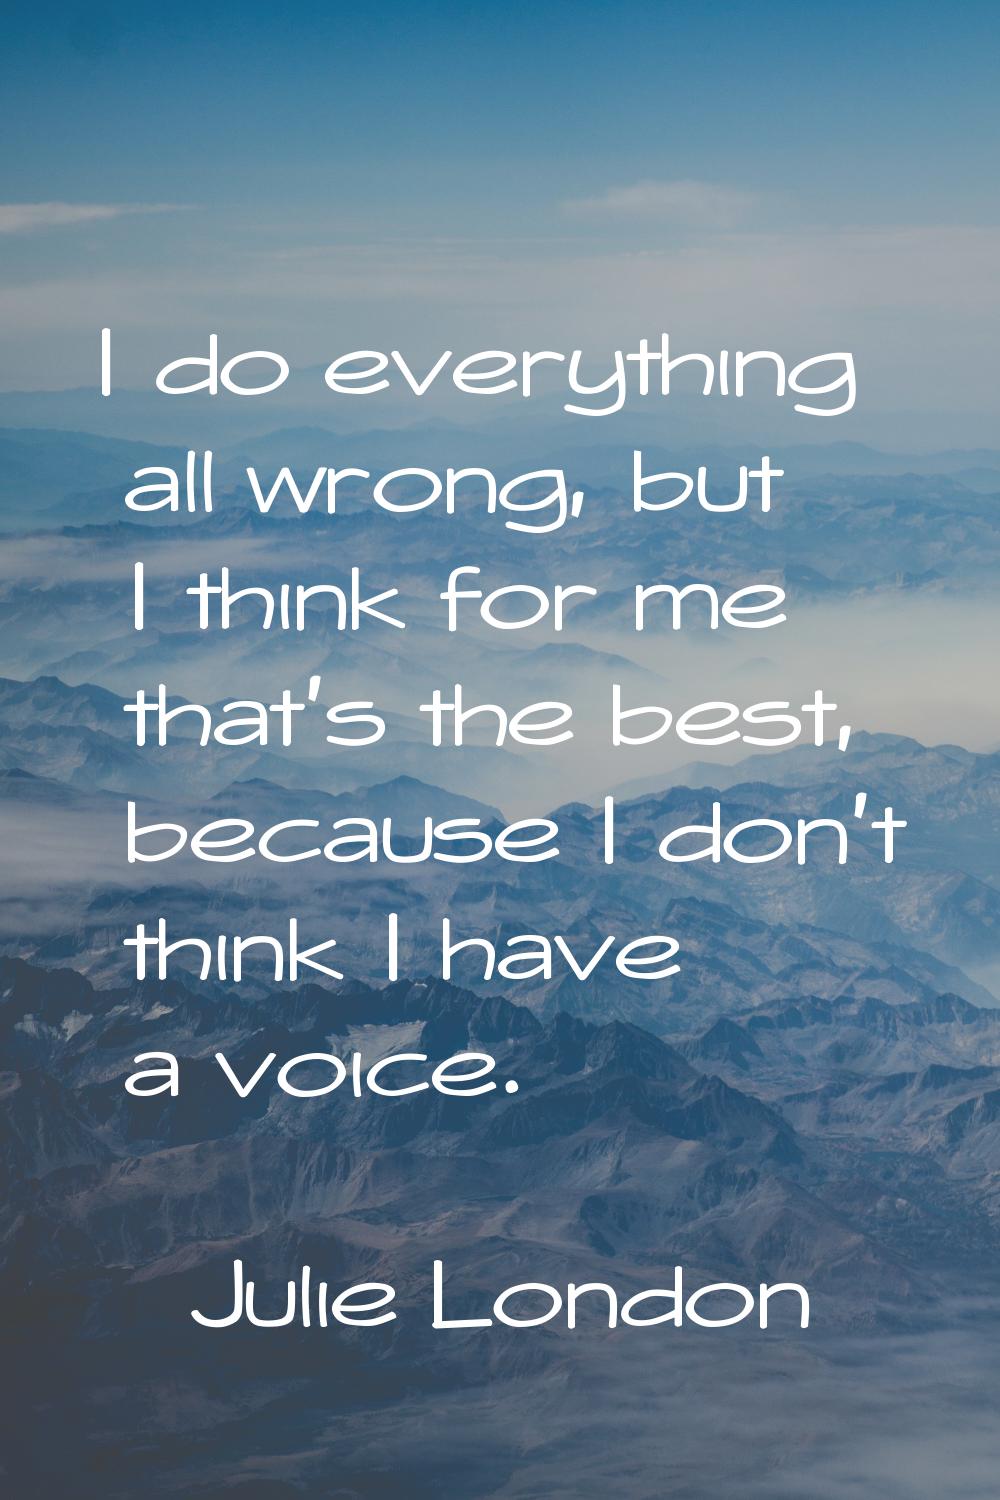 I do everything all wrong, but I think for me that's the best, because I don't think I have a voice